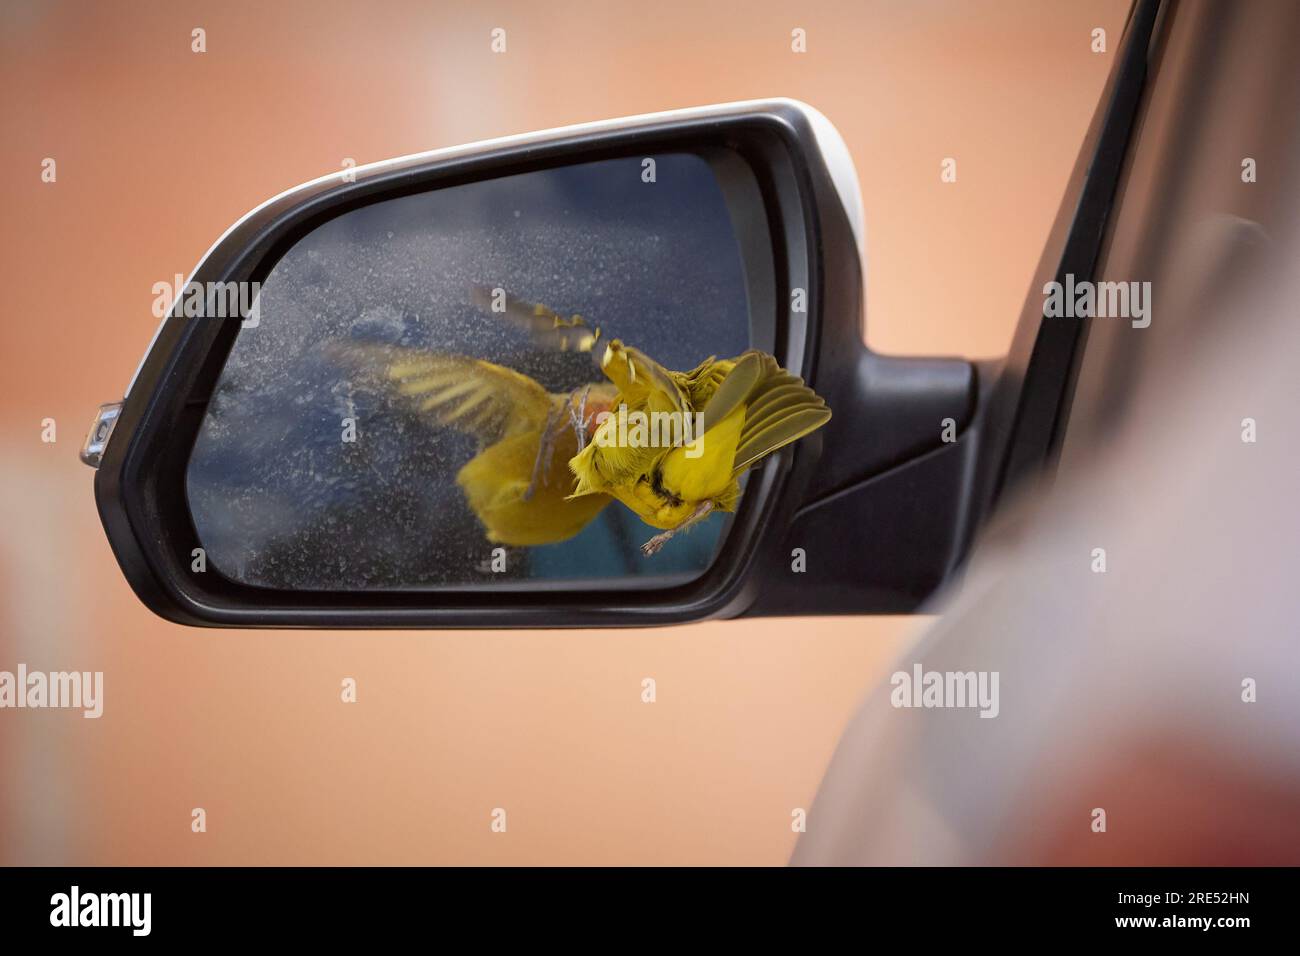 A canary bird is seen bumping into a car's side mirror while